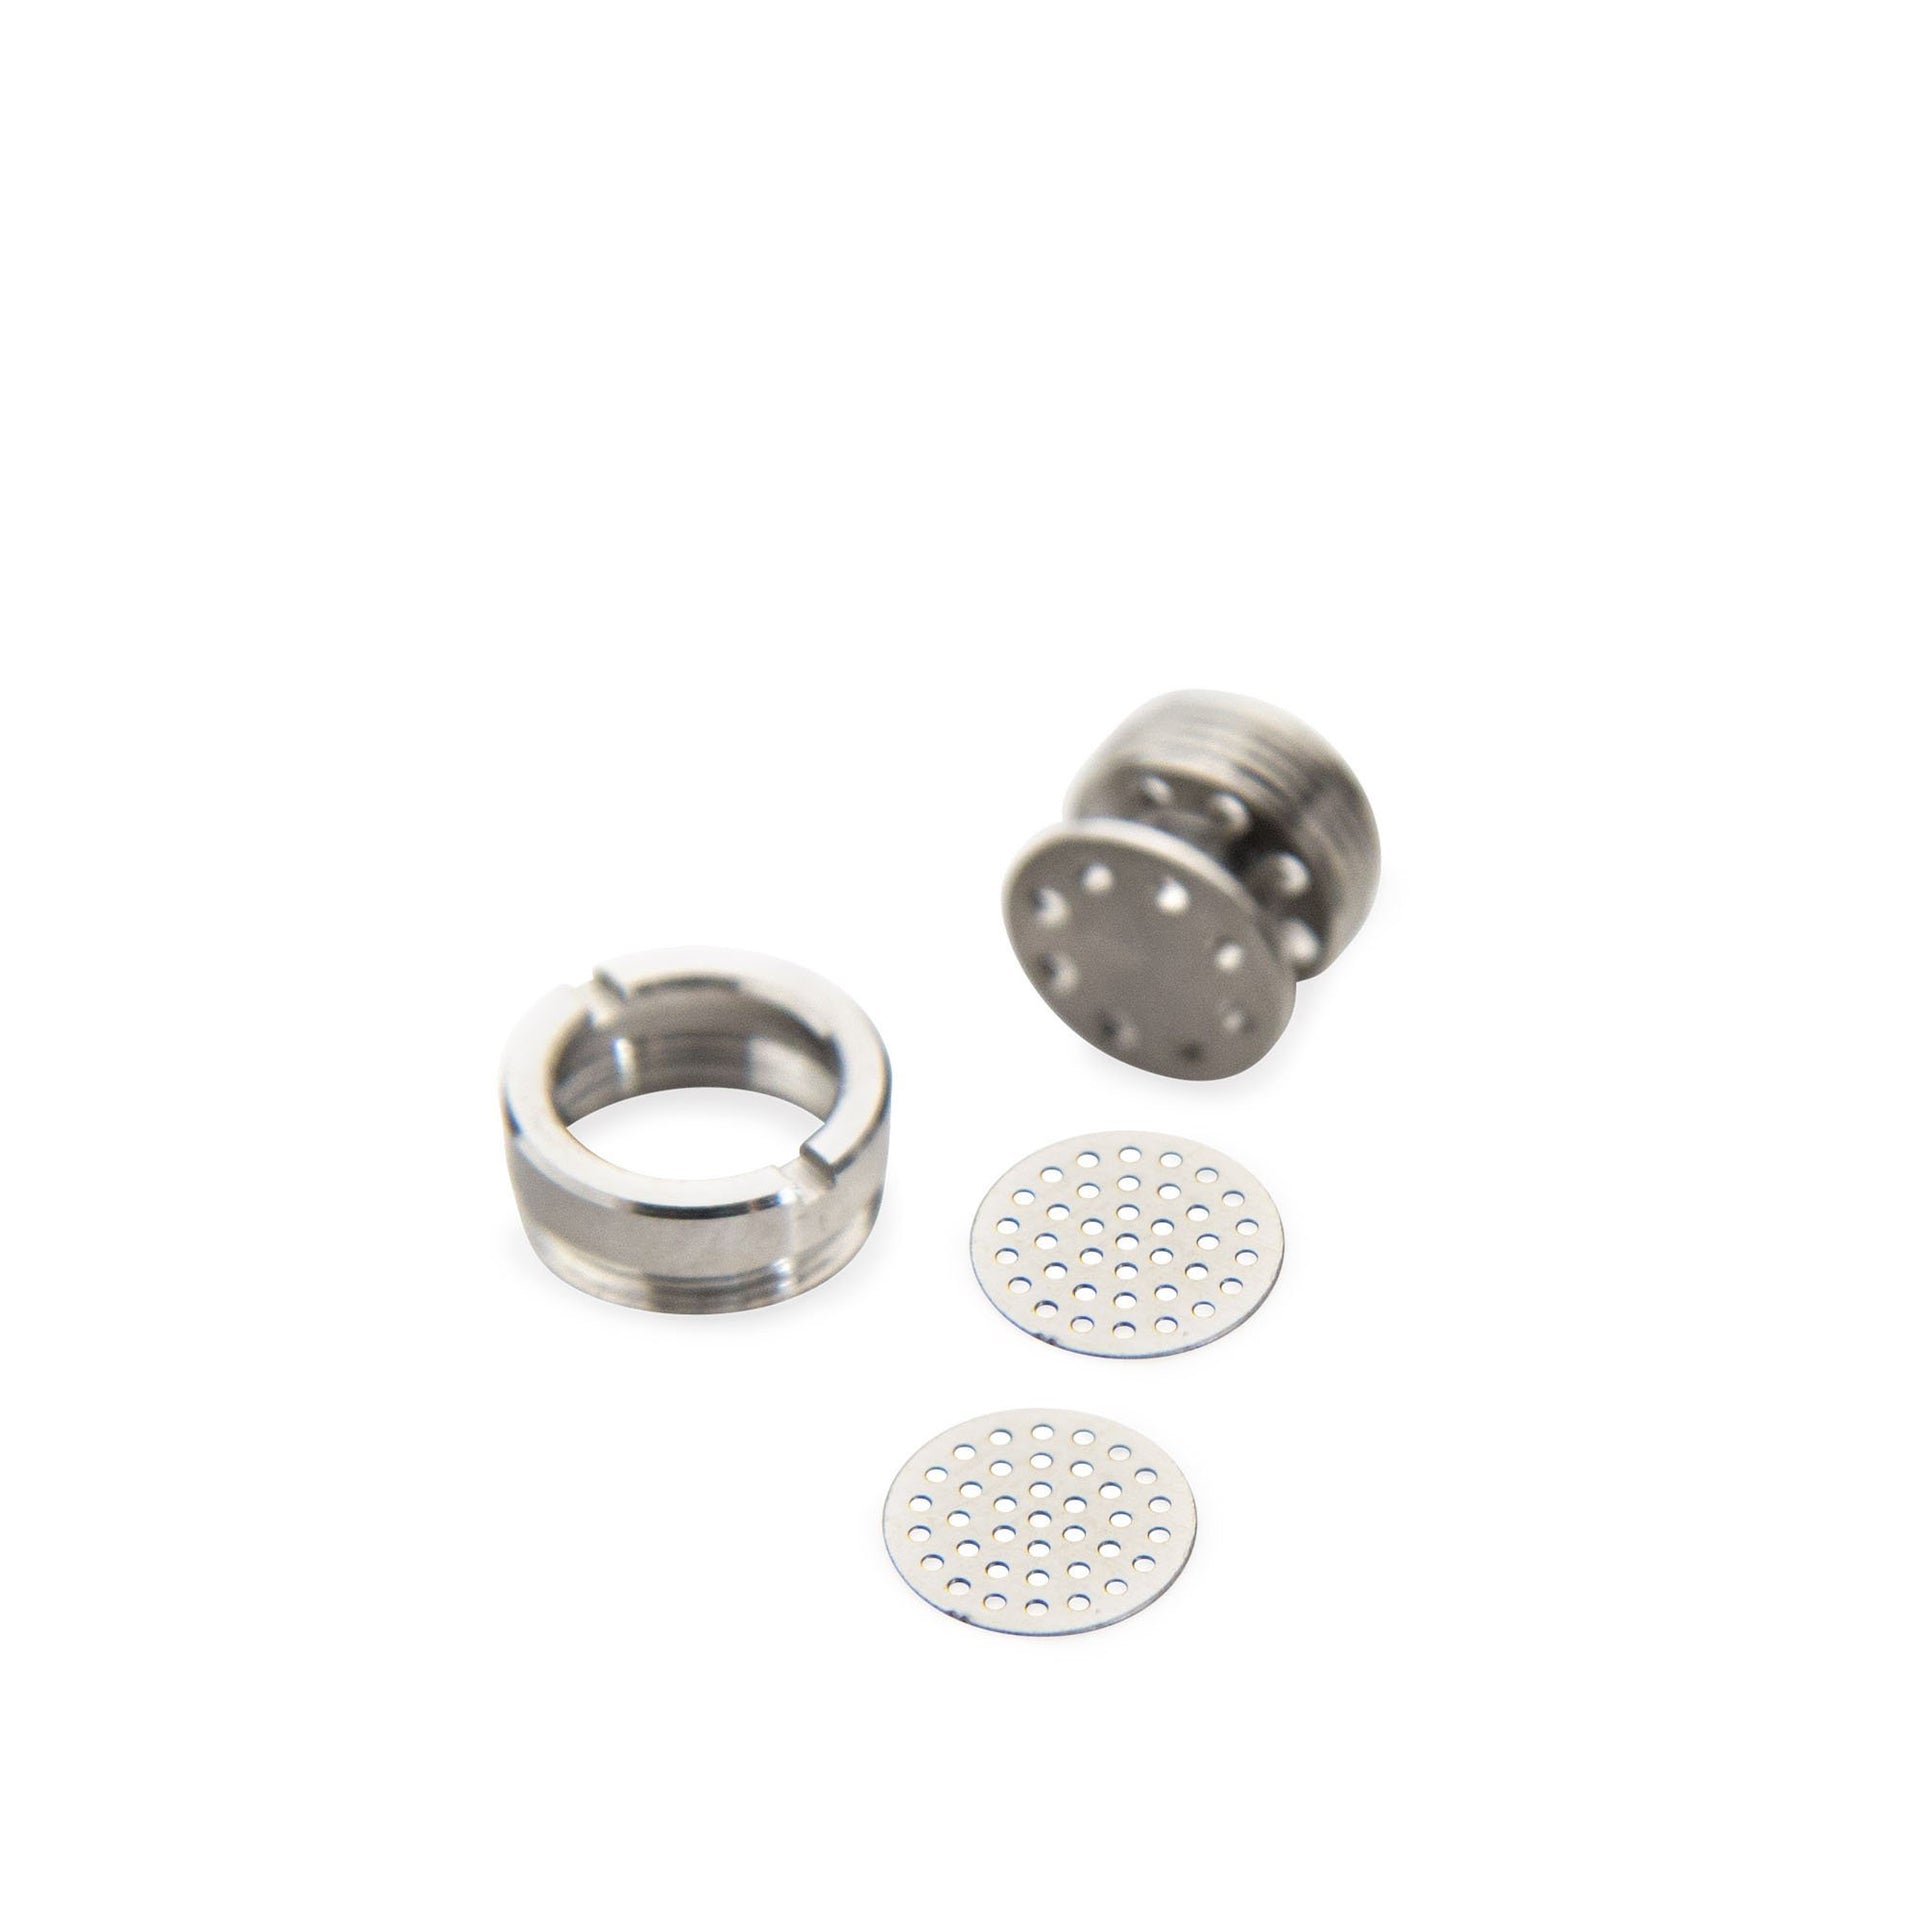 LINX Gaia Mouthpiece Filter 2-Pack | Vaporizer Parts & Accessories | 420 Science